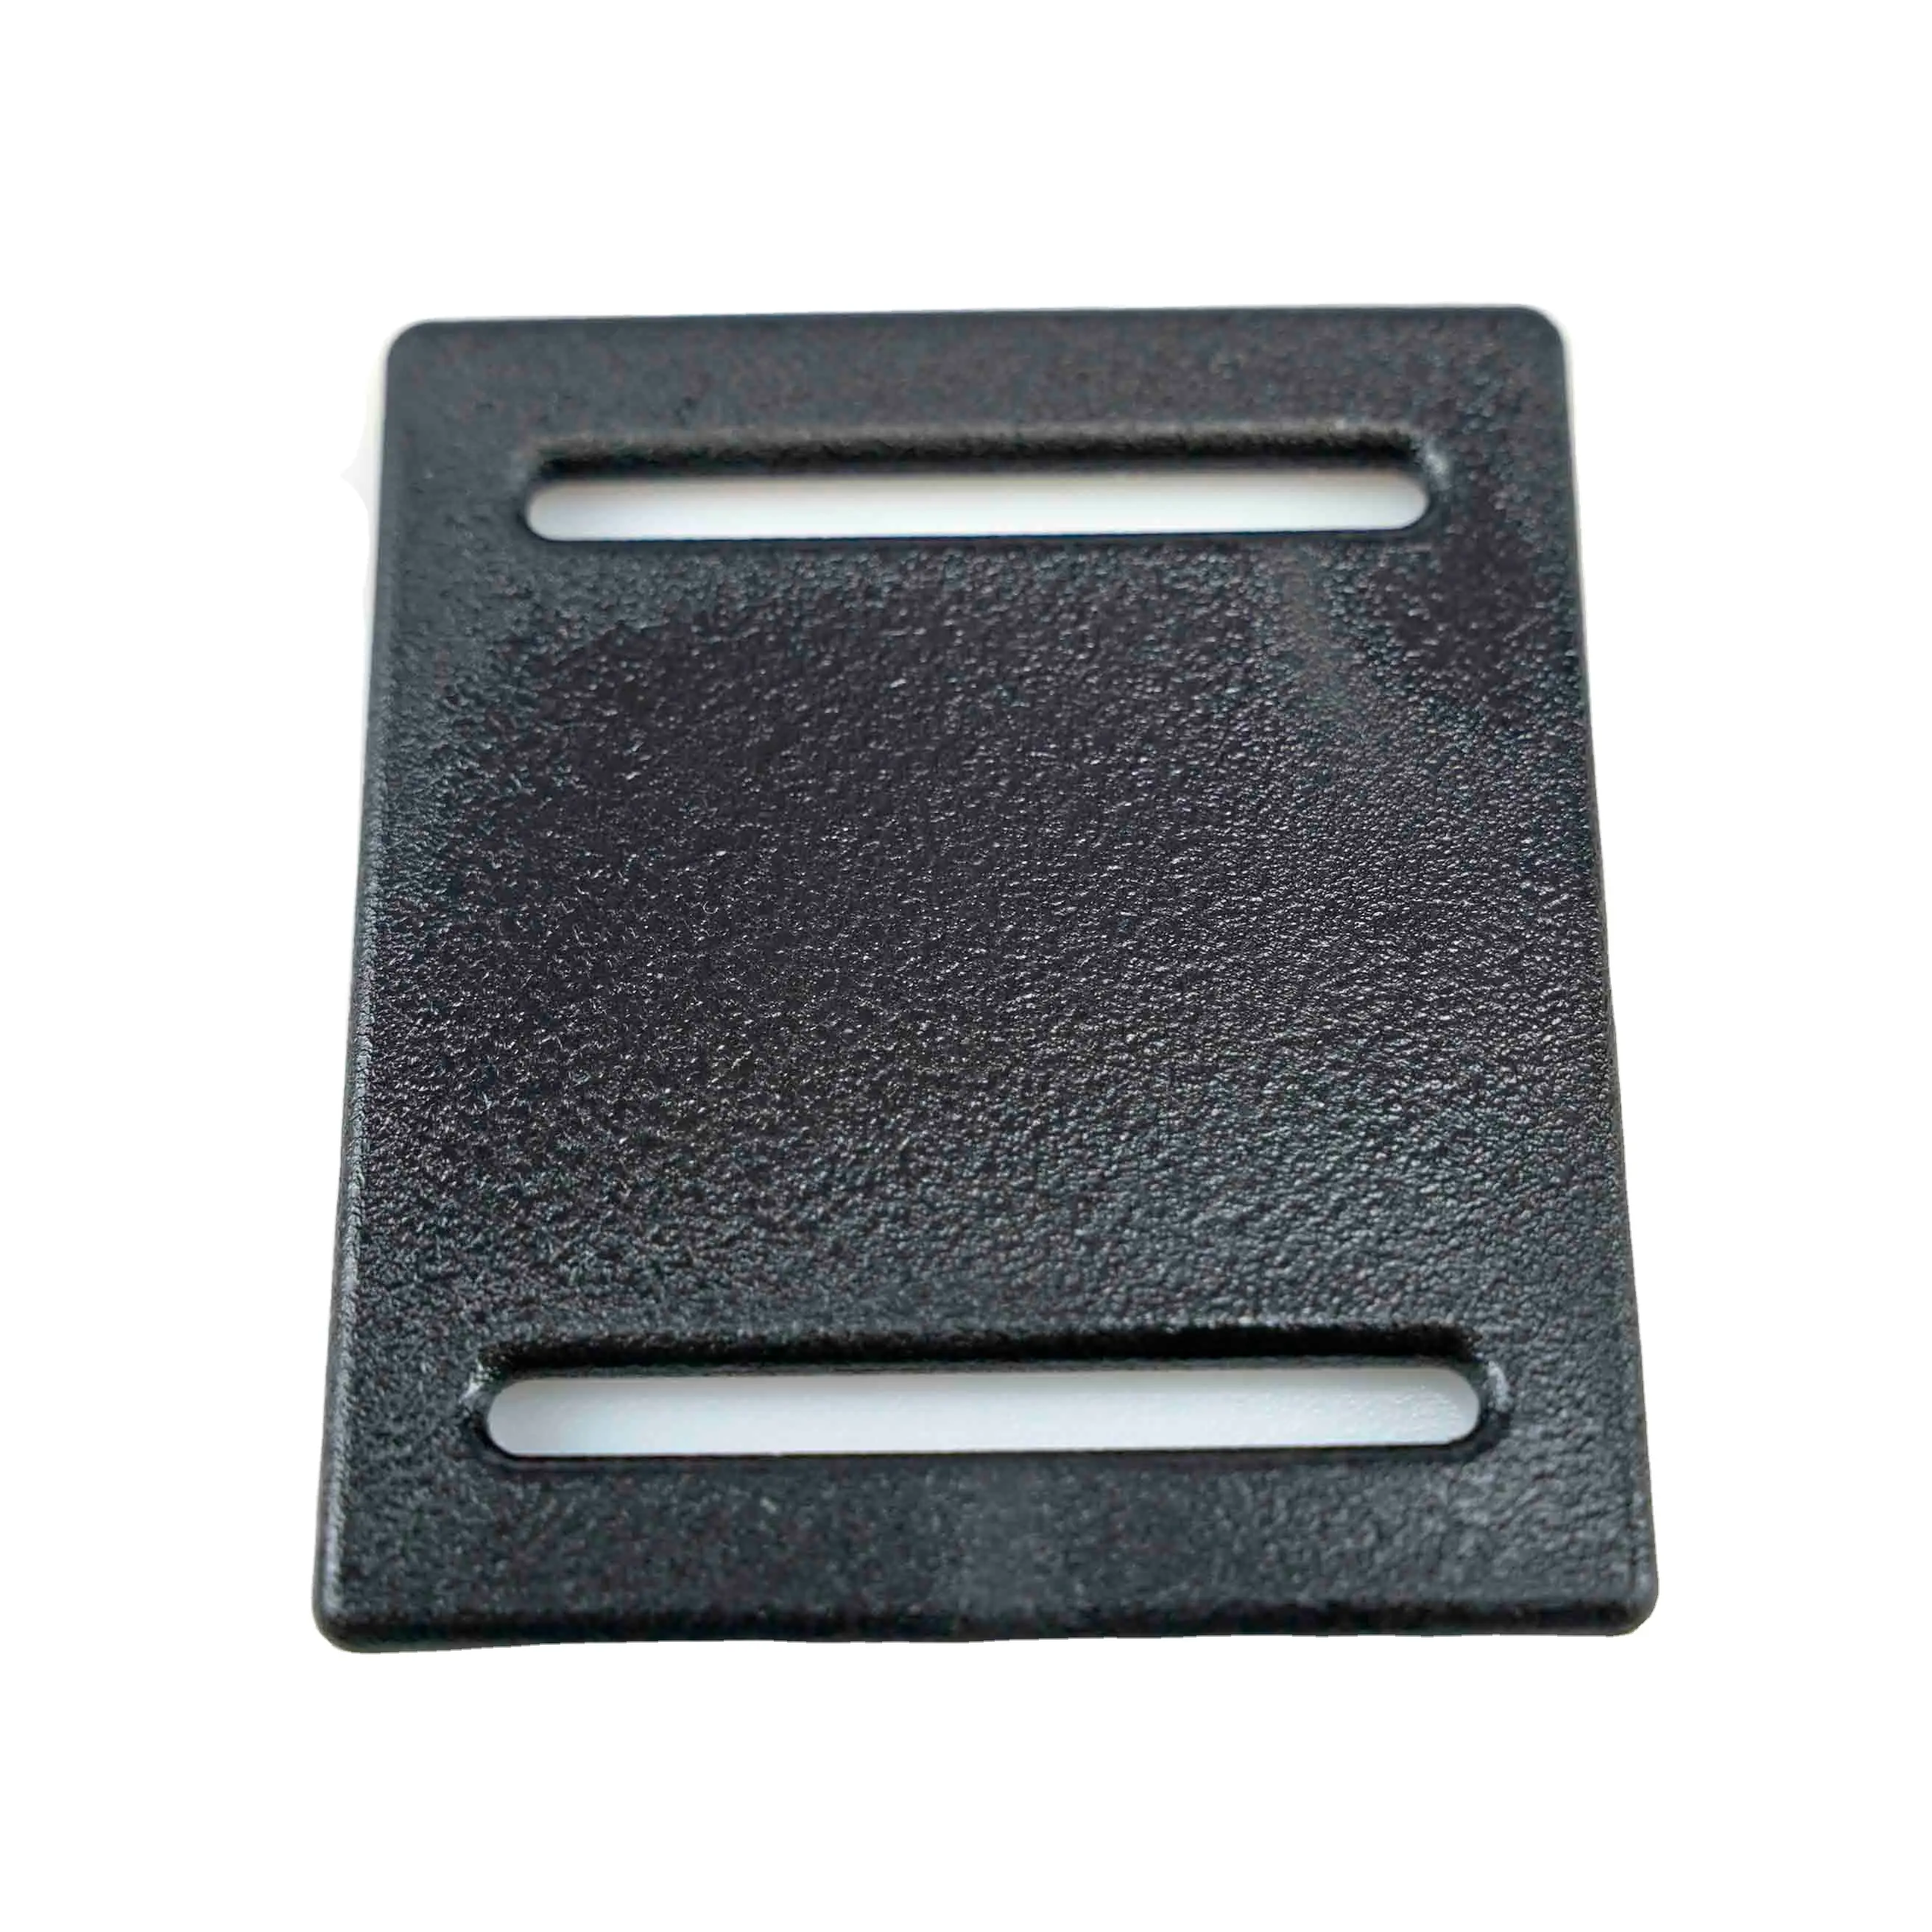 Hot sale high quality right angle Plastic Tri Glide Slide Buckle for Strap or Webbing